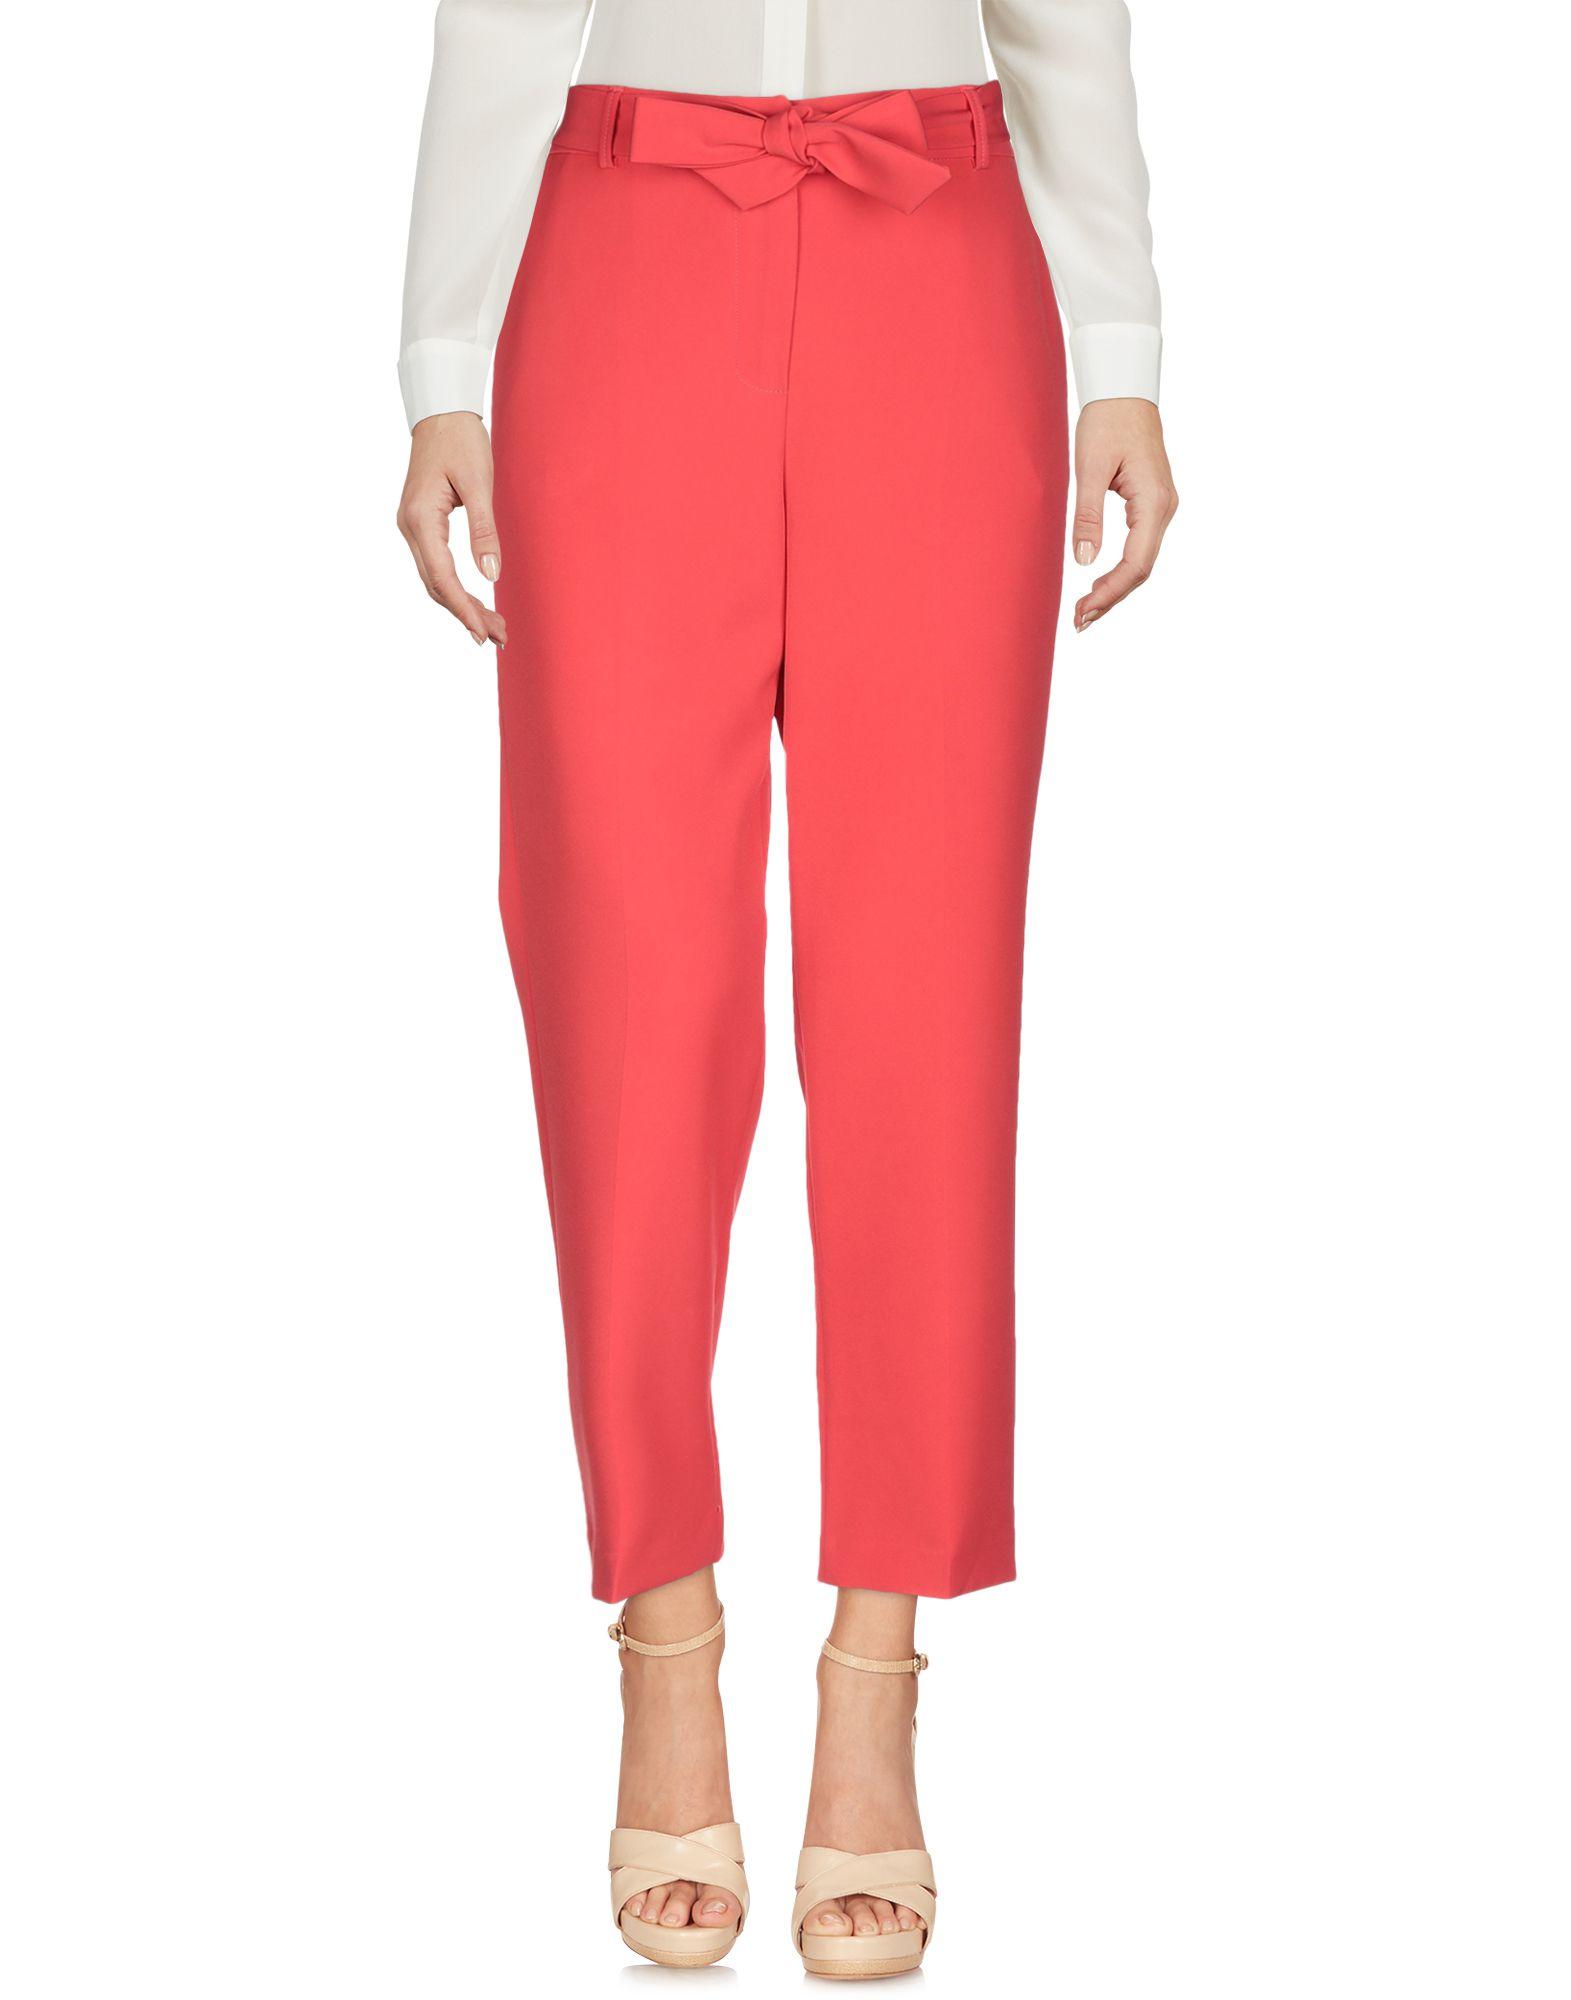 Kocca Synthetic Pants in Coral (Pink) - Lyst